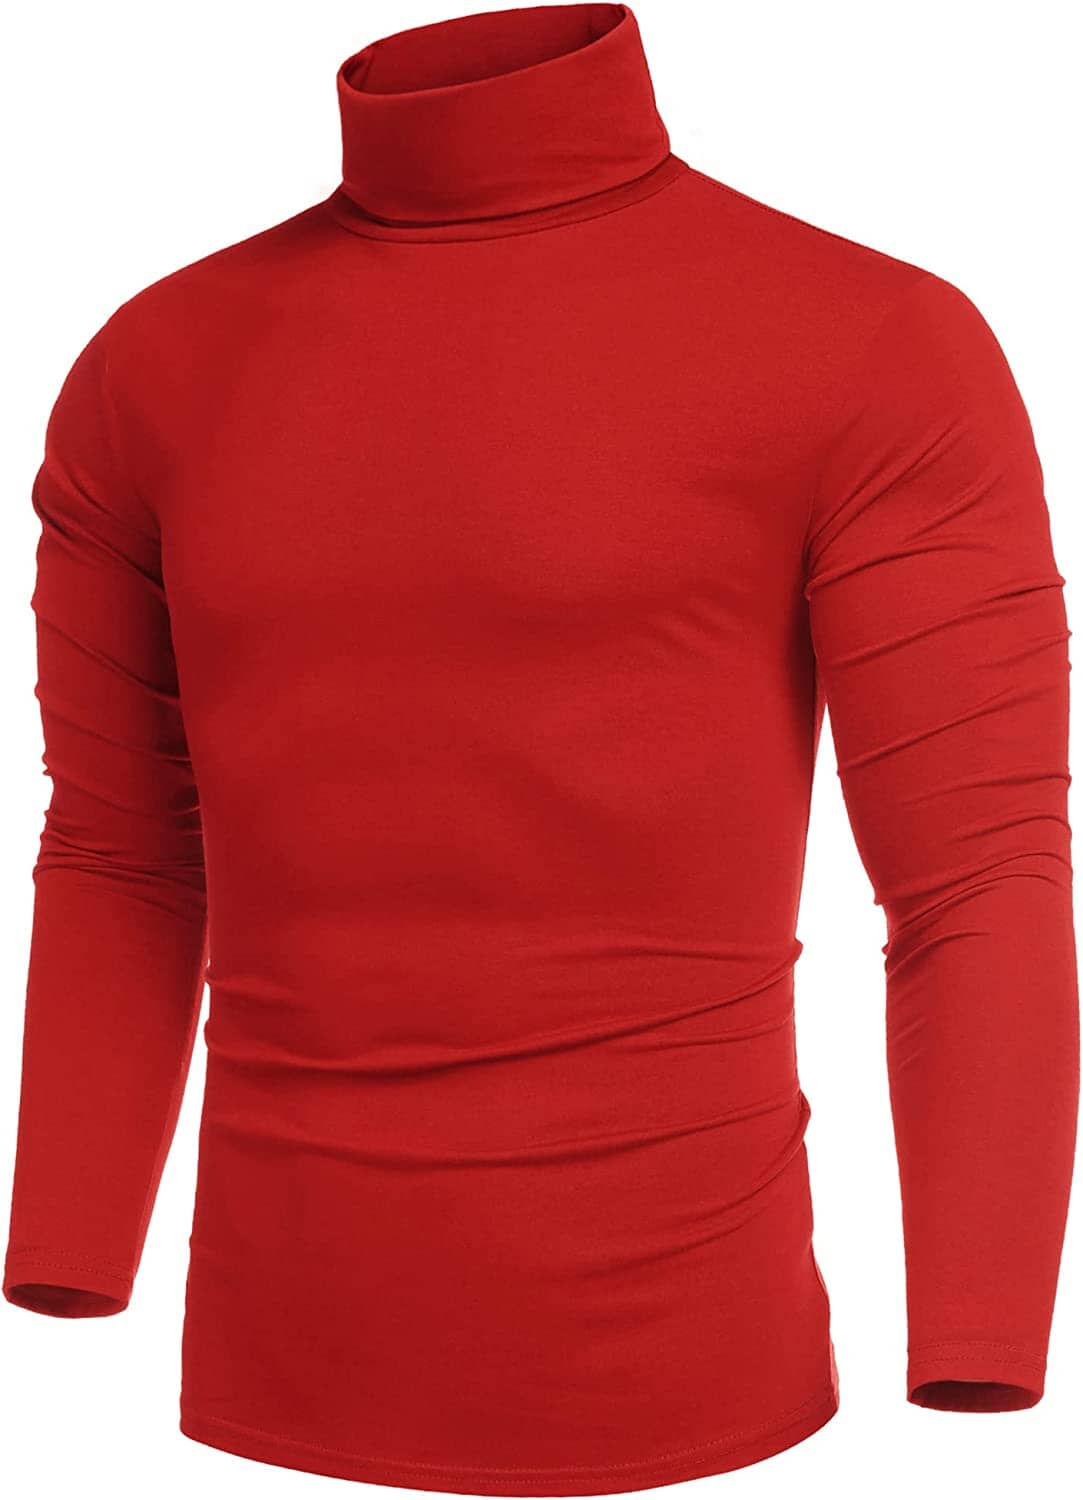 Slim Fit Turtleneck Basic Cotton Sweater (US Only) Sweaters COOFANDY Store Red S 